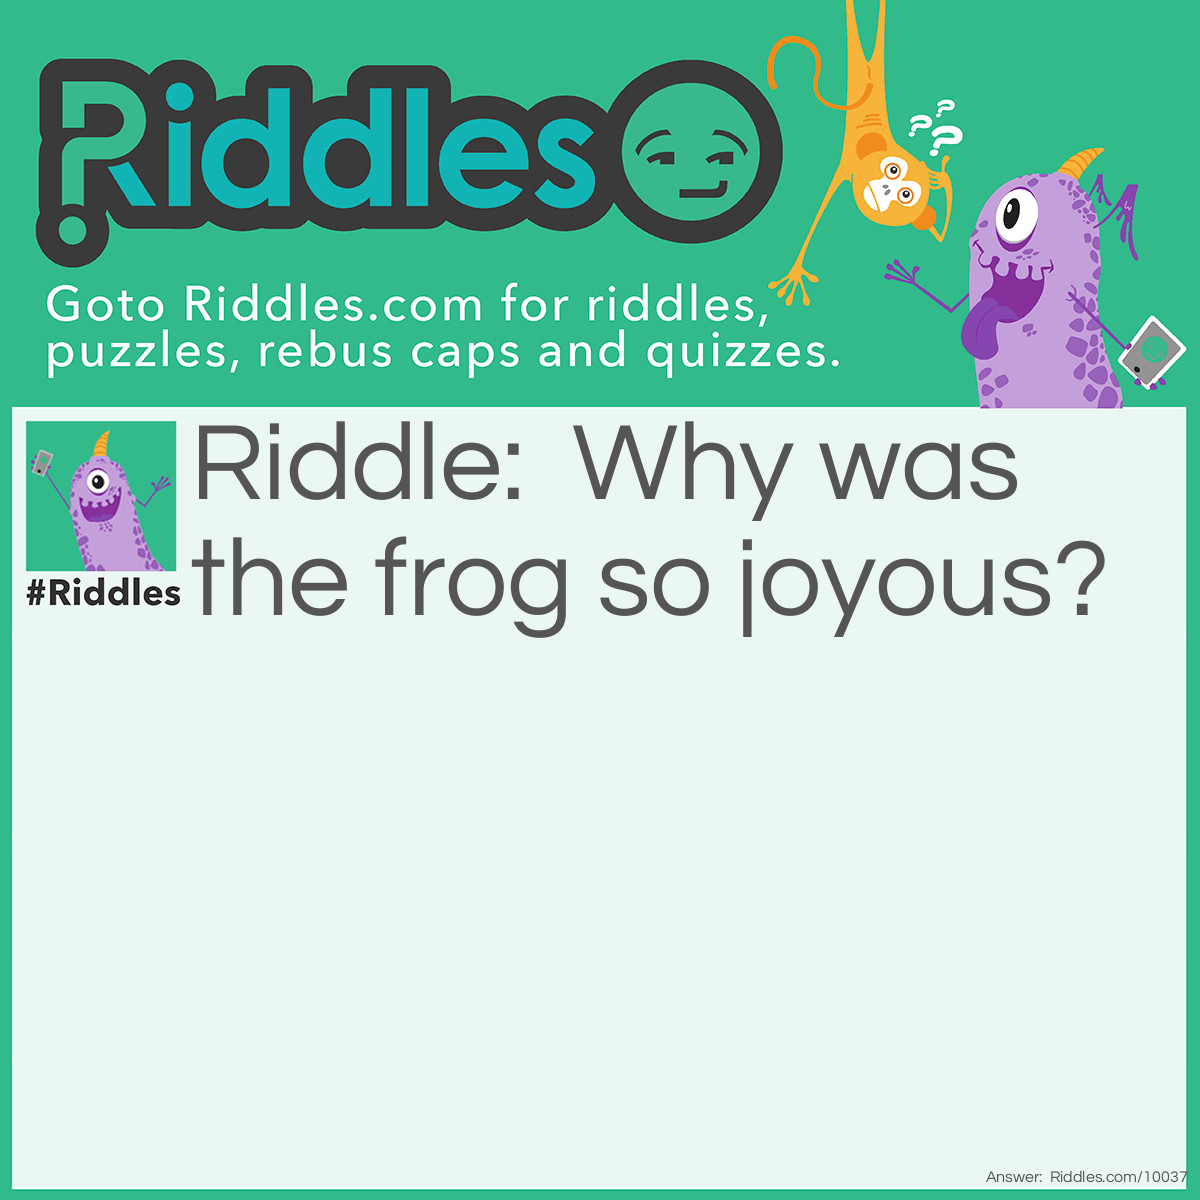 Riddle: Why was the frog so joyous? Answer: It eats what "bugs" it.